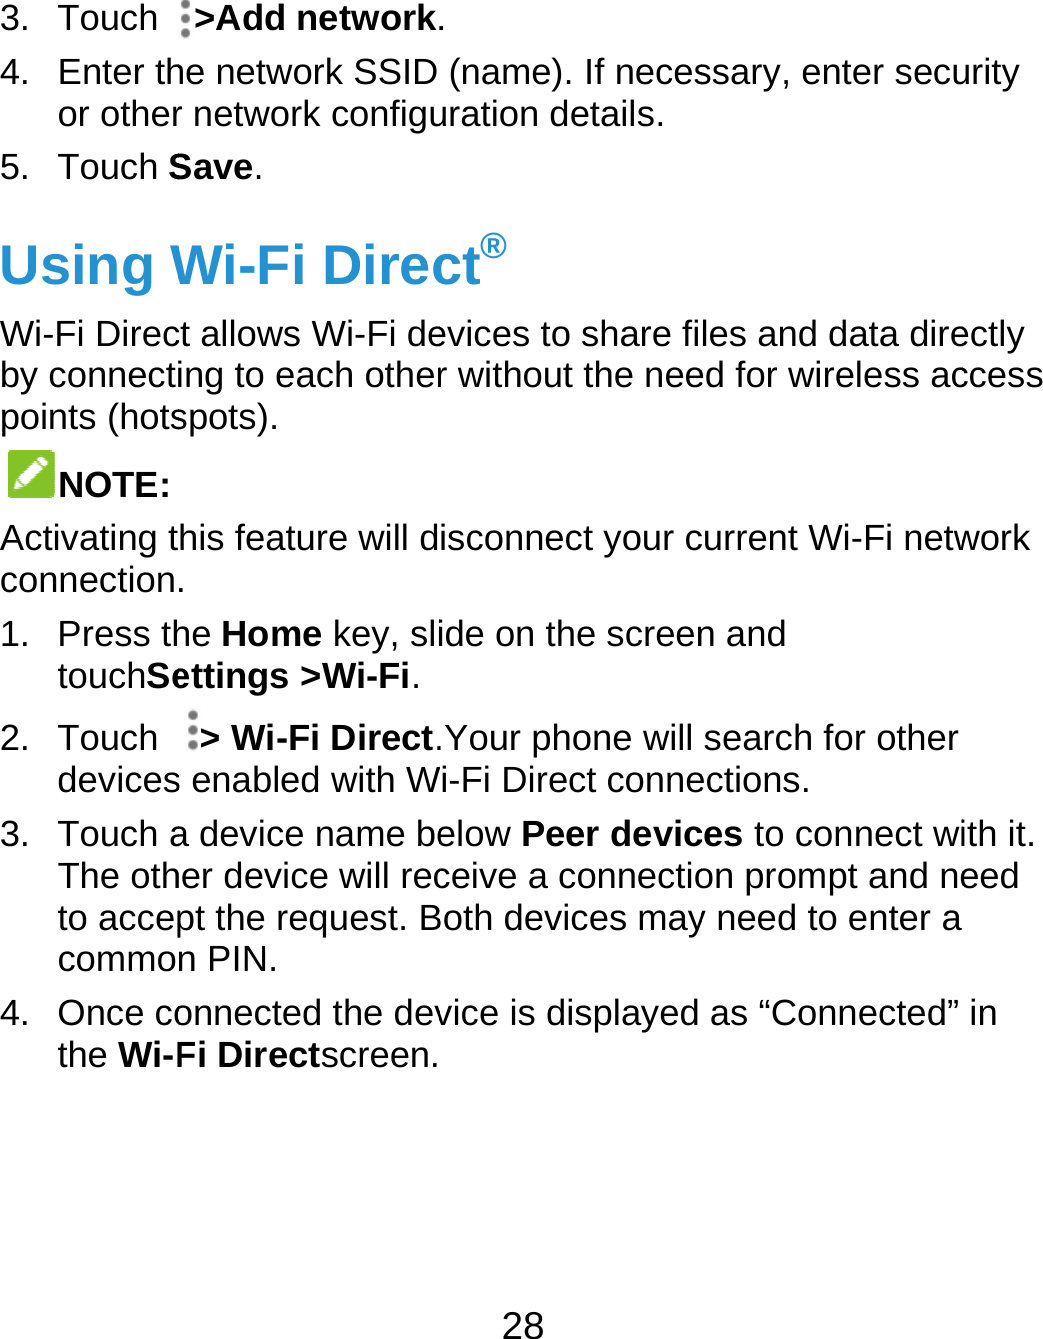  3. Touch 4. Enter thor other5. Touch SUsing WWi-Fi Direcby connectpoints (hotsNOTE: Activating tconnection1. Press thtouchSe2. Touch devices3. Touch aThe othto accepcommo4. Once cothe Wi-F &gt;Add network.he network SSID r network configuSave. Wi-Fi Direcct allows Wi-Fi deing to each otherspots). his feature will d. he Home key, sliettings &gt;Wi-Fi. &gt; Wi-Fi Direct.s enabled with Wa device name beher device will recpt the request. Bn PIN. onnected the devFi Directscreen.28 . (name). If necesuration details.ct® evices to share fir without the neeisconnect your cide on the screen.Your phone will Wi-Fi Direct conneelow Peer devicceive a connectioBoth devices mayvice is displayed  ssary, enter secules and data direed for wireless accurrent Wi-Fi netwn and search for other ections. ces to connect wion prompt and ney need to enter a as “Connected” urity ectly ccess work ith it. eed in 